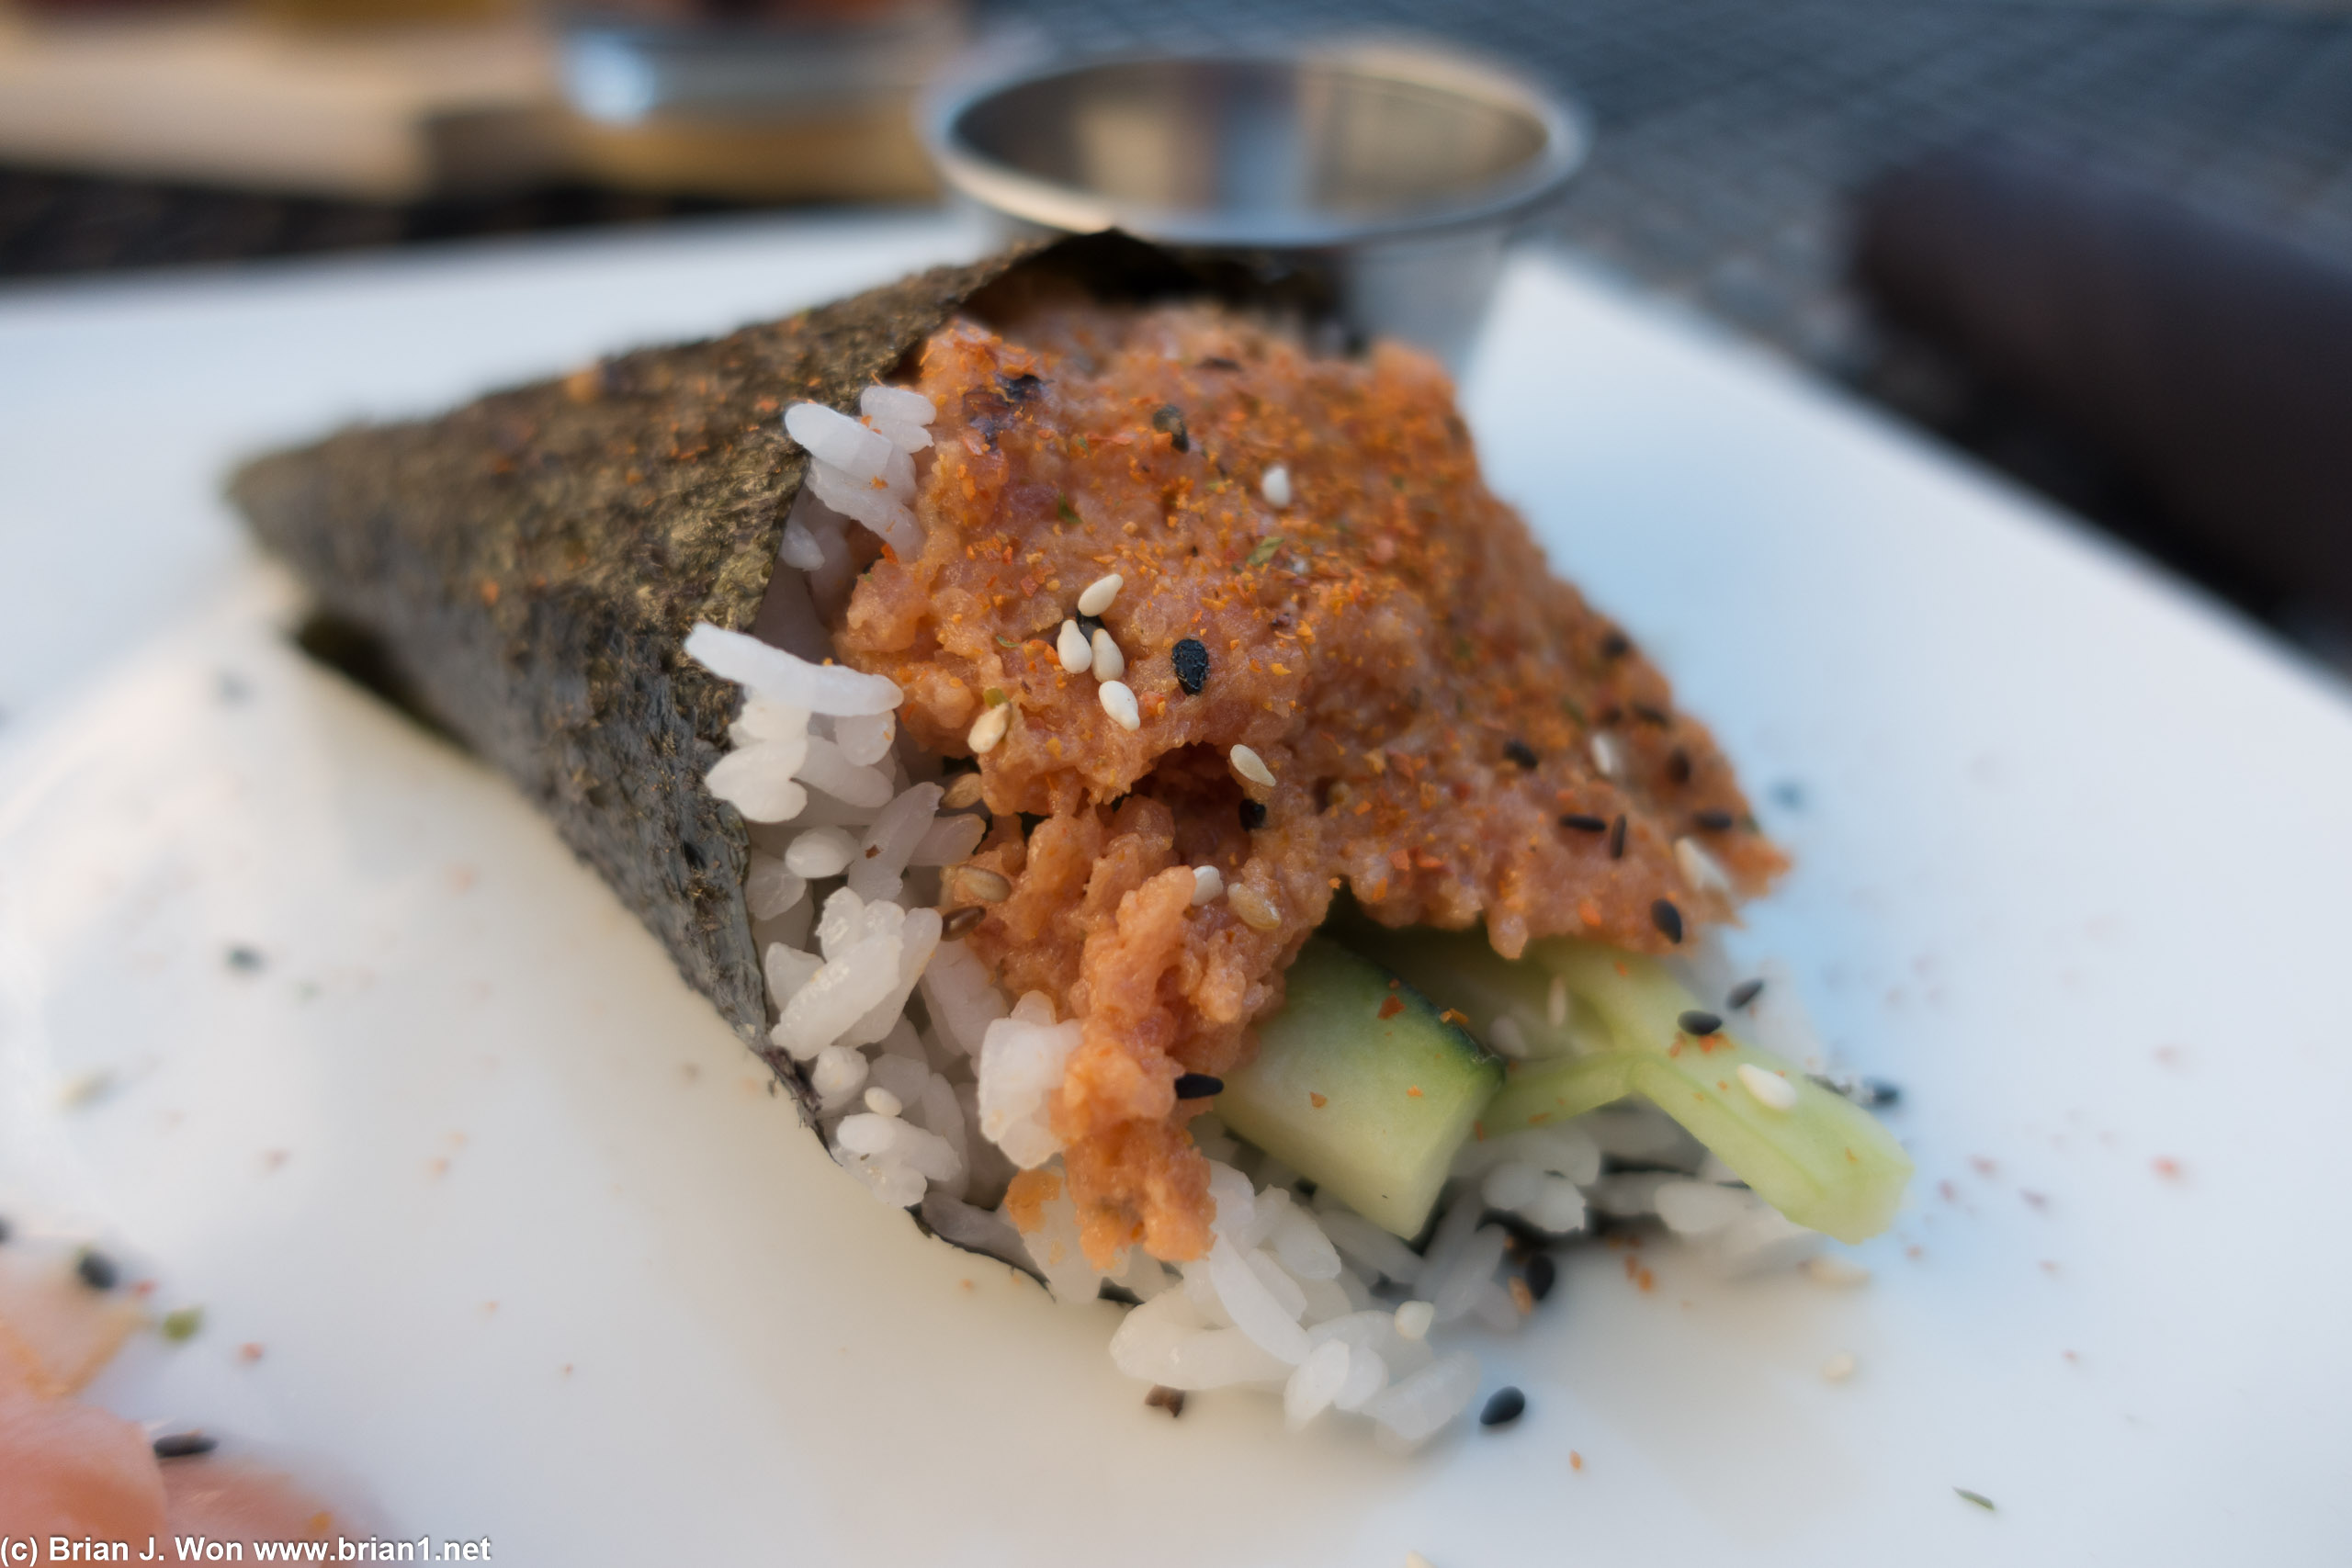 For some reason a spicy tuna hand roll was appealing. It was at least tastier than it looked.